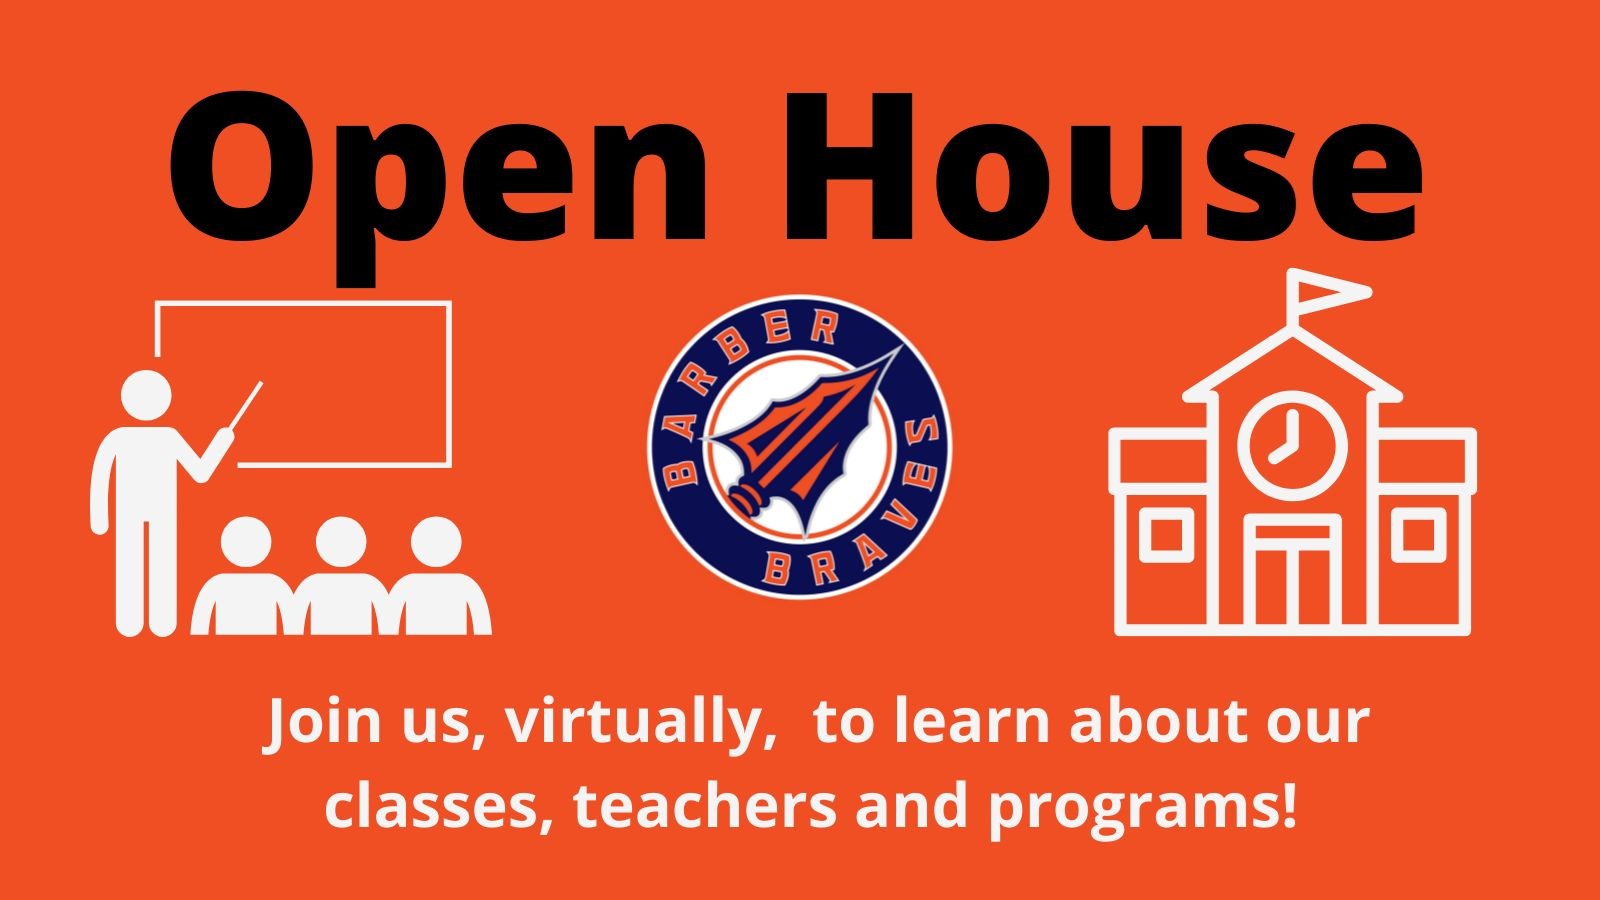 Barber Open House. Join us virtually to learn about our classes, teachers, and programs! 